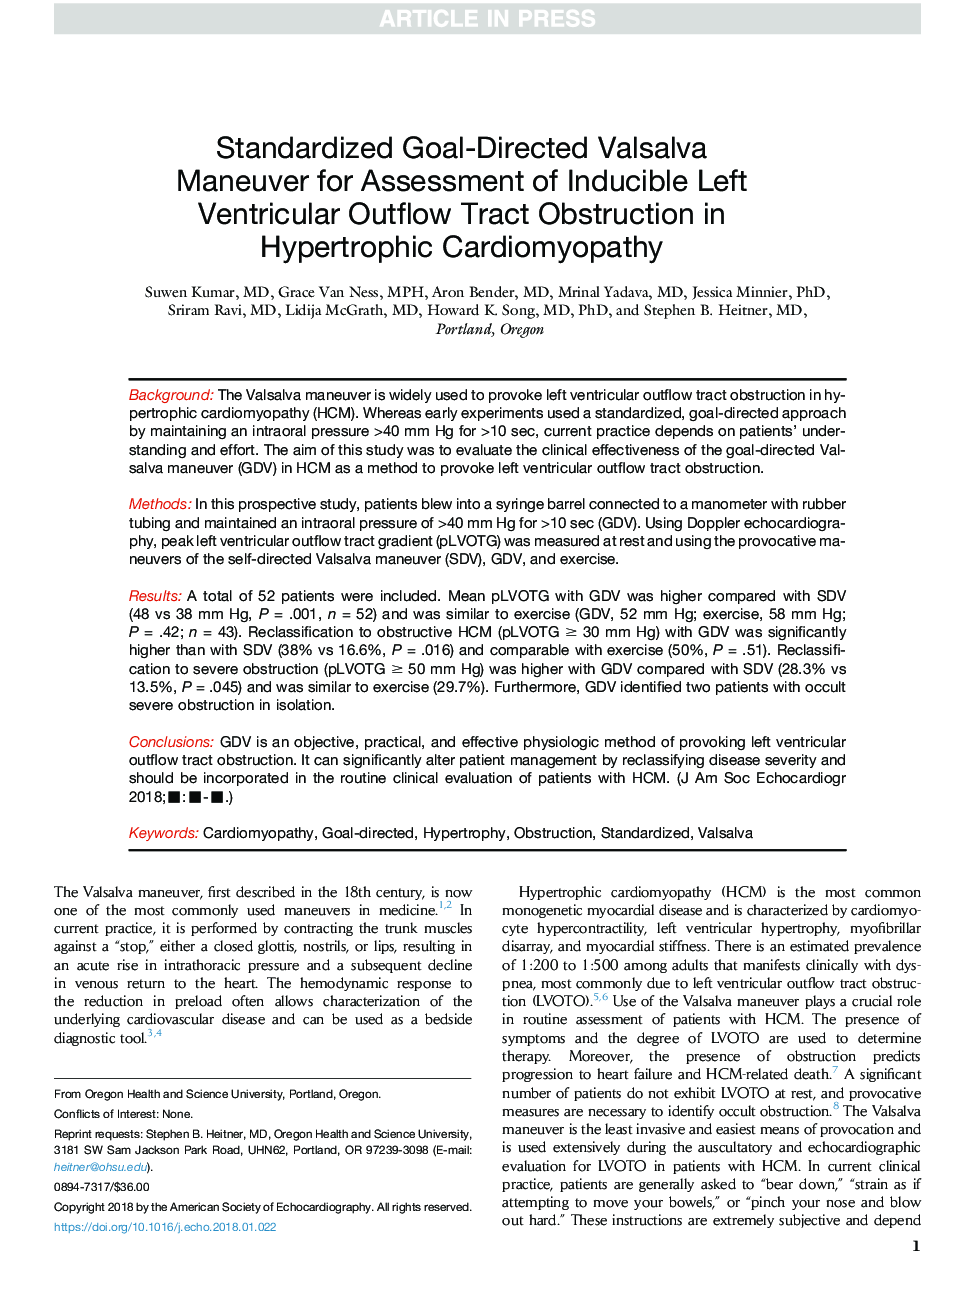 Standardized Goal-Directed Valsalva Maneuver for Assessment of Inducible Left Ventricular Outflow Tract Obstruction in Hypertrophic Cardiomyopathy